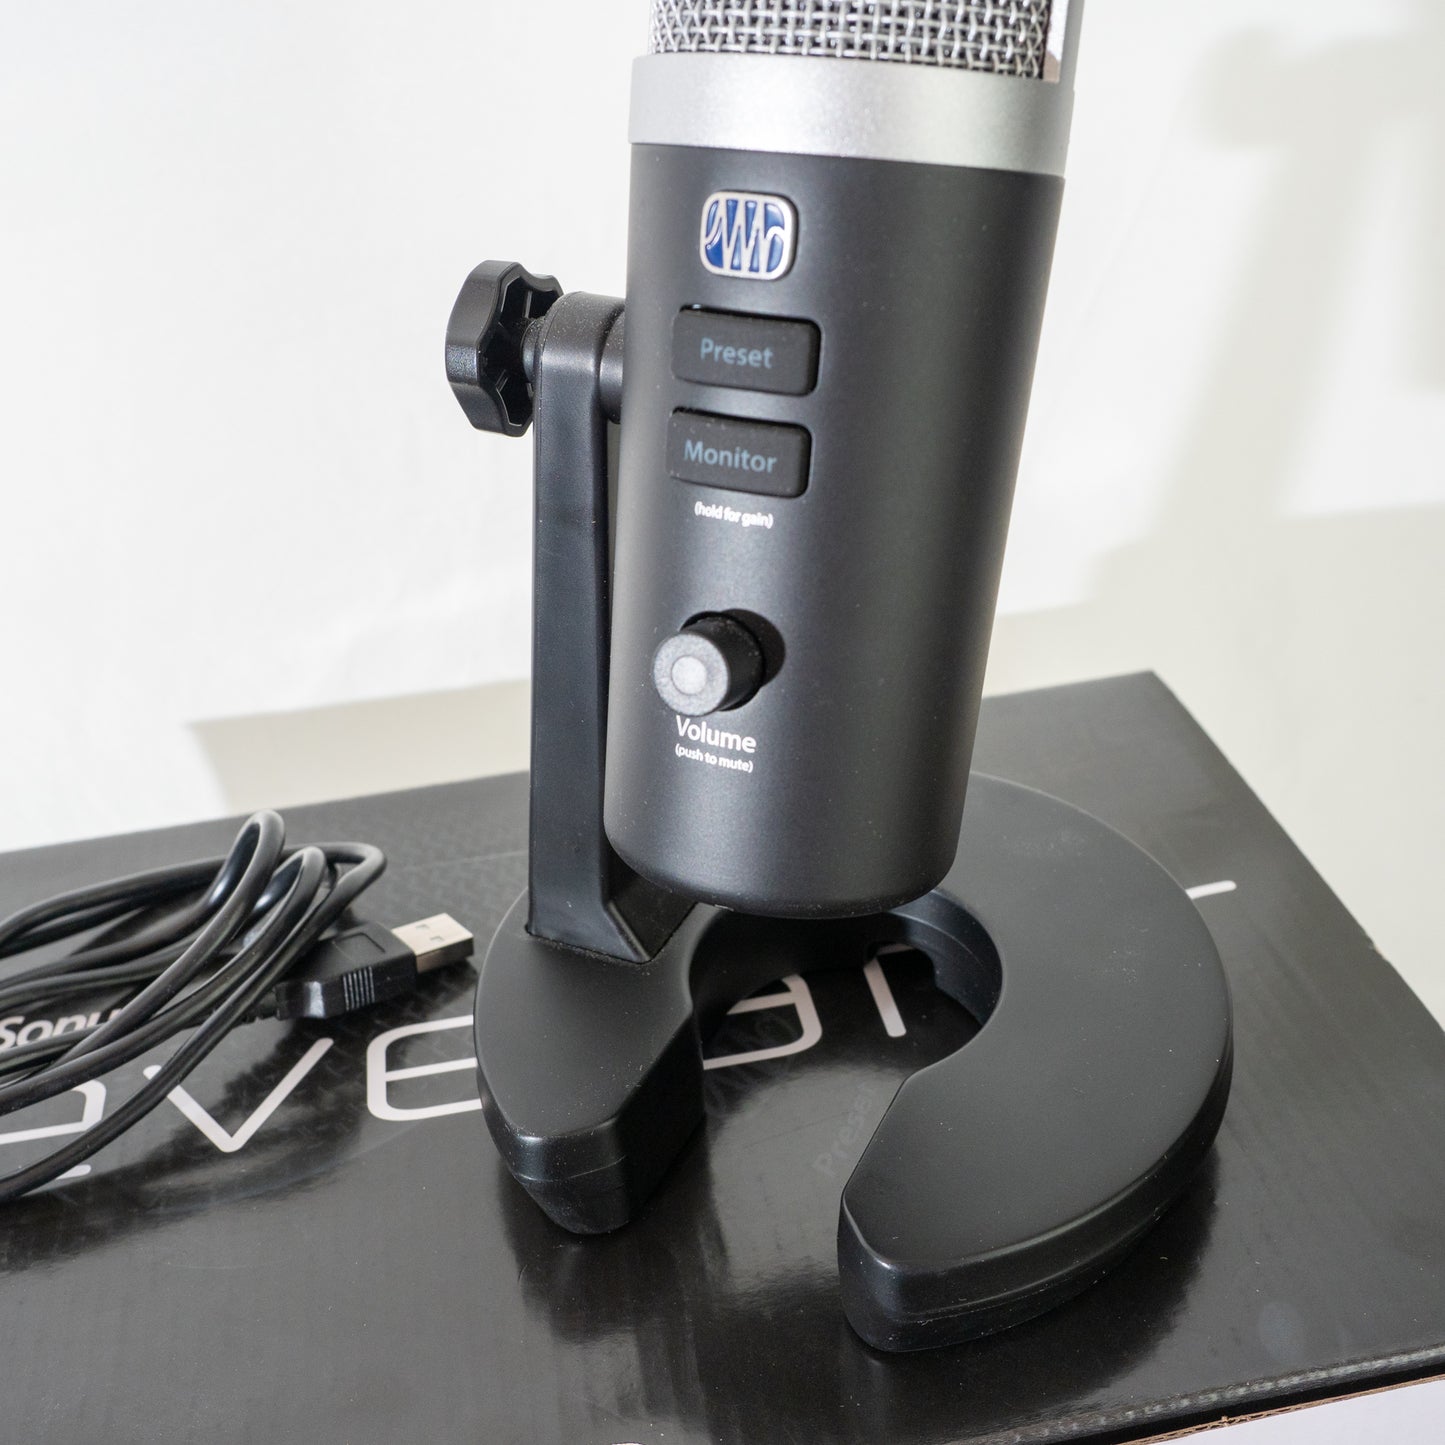 Presonus Revelator demo model USB Microphone with stand, software not included